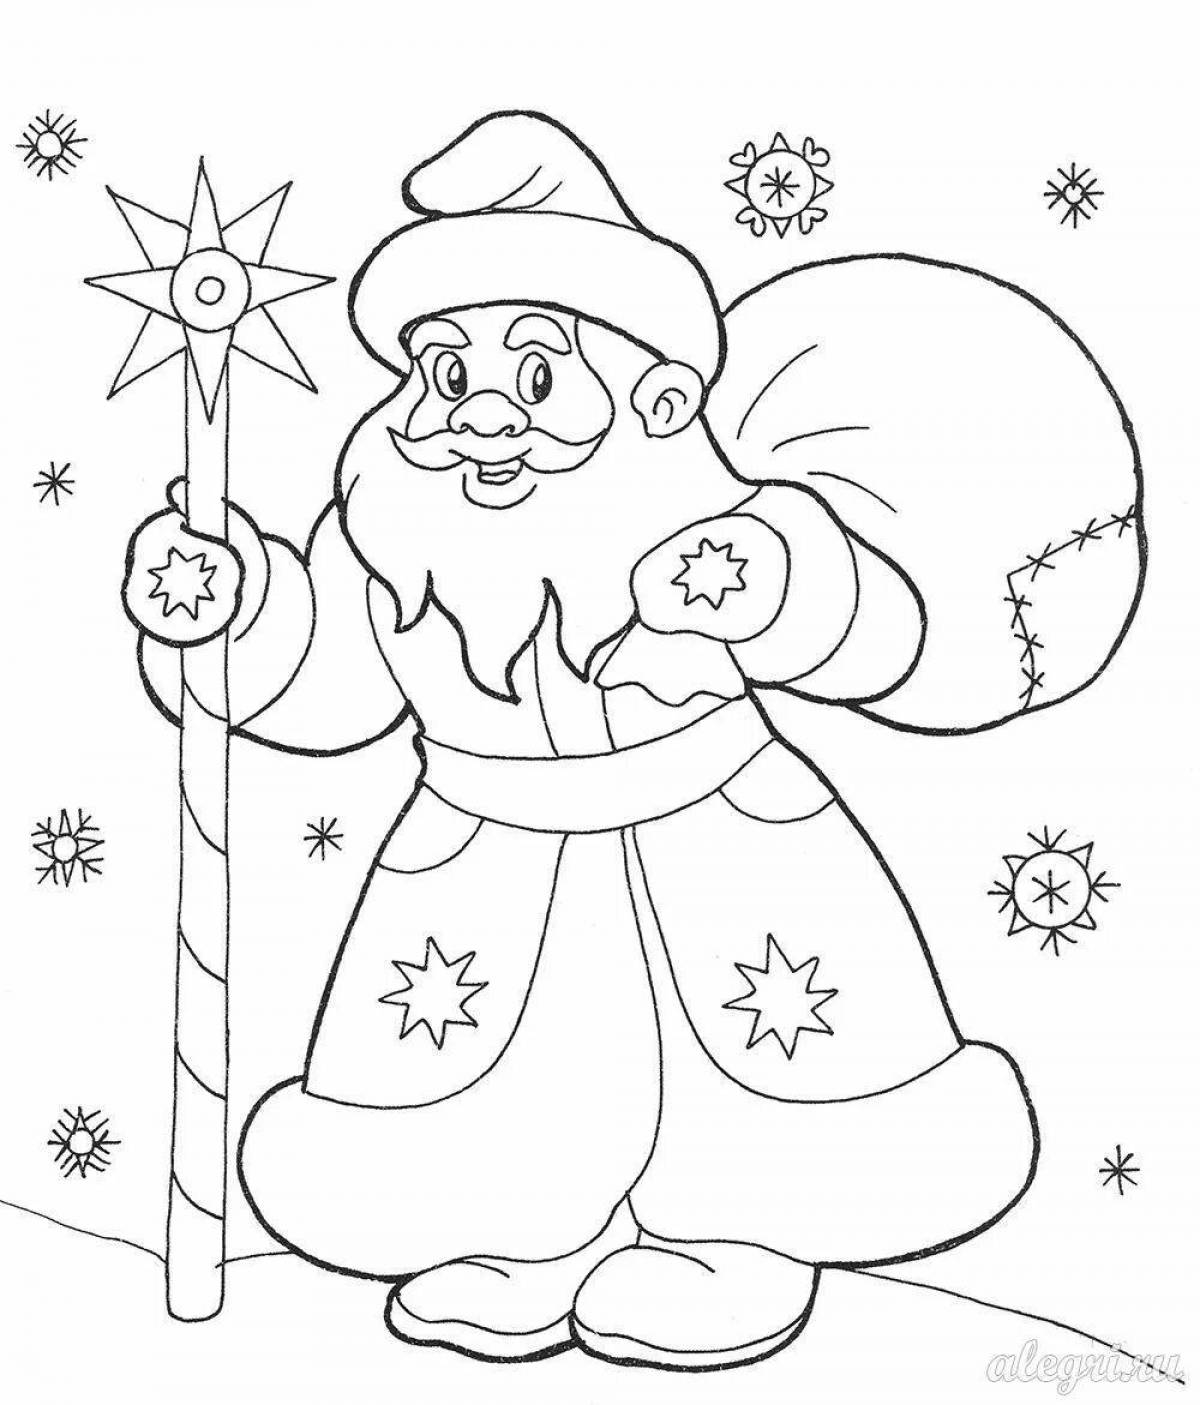 Color-frenzy coloring page new for kids